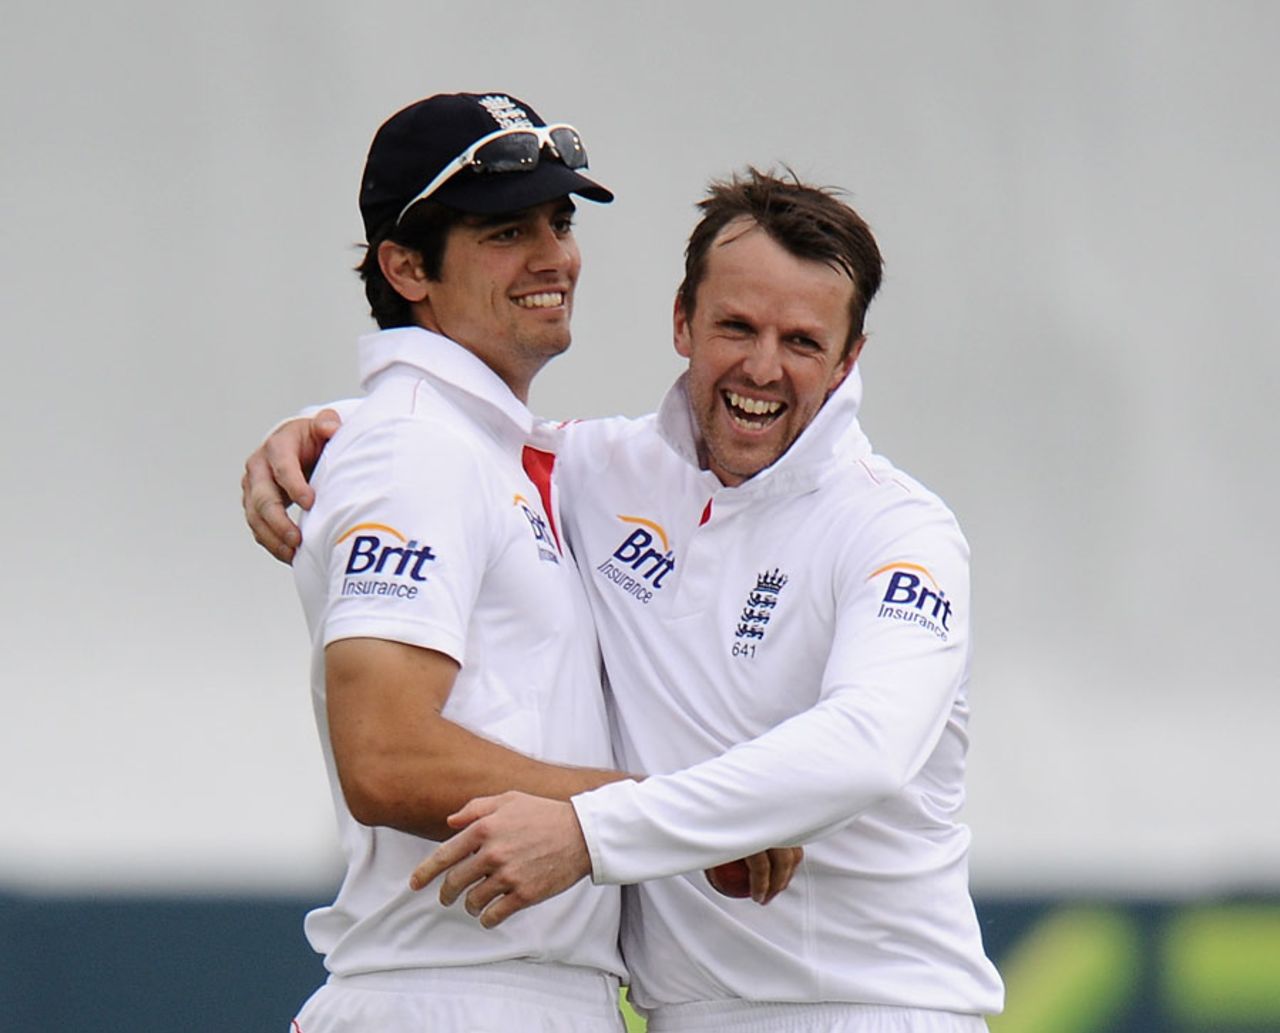 Graeme Swann showed no problems after the blow on his arm, Essex v England, 4th day, Chelmsford, July 3, 2013